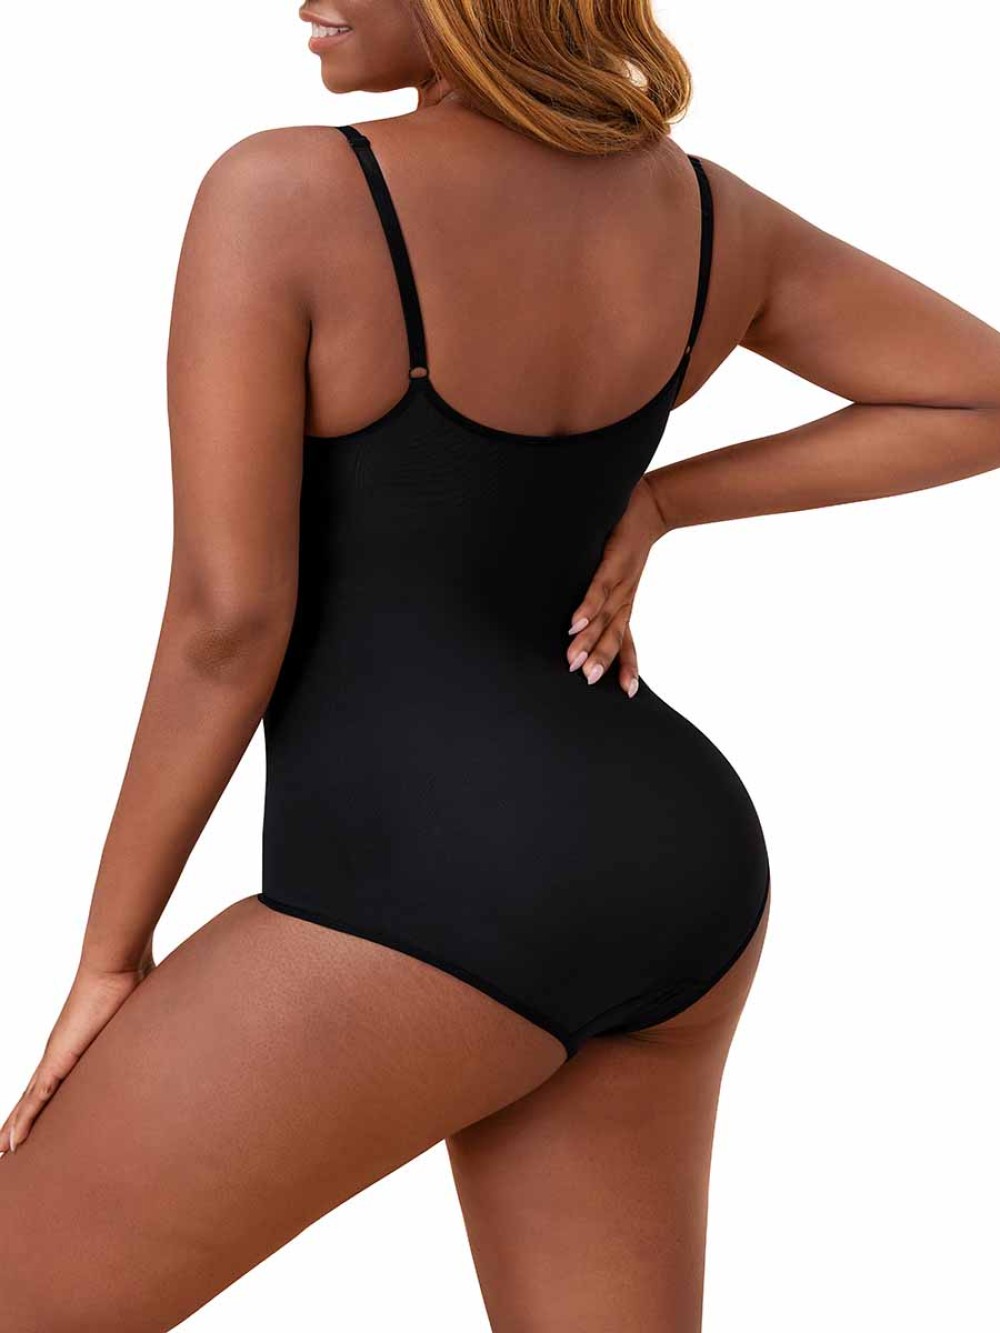 New Arrival Plus Size Seamless Body Shaper